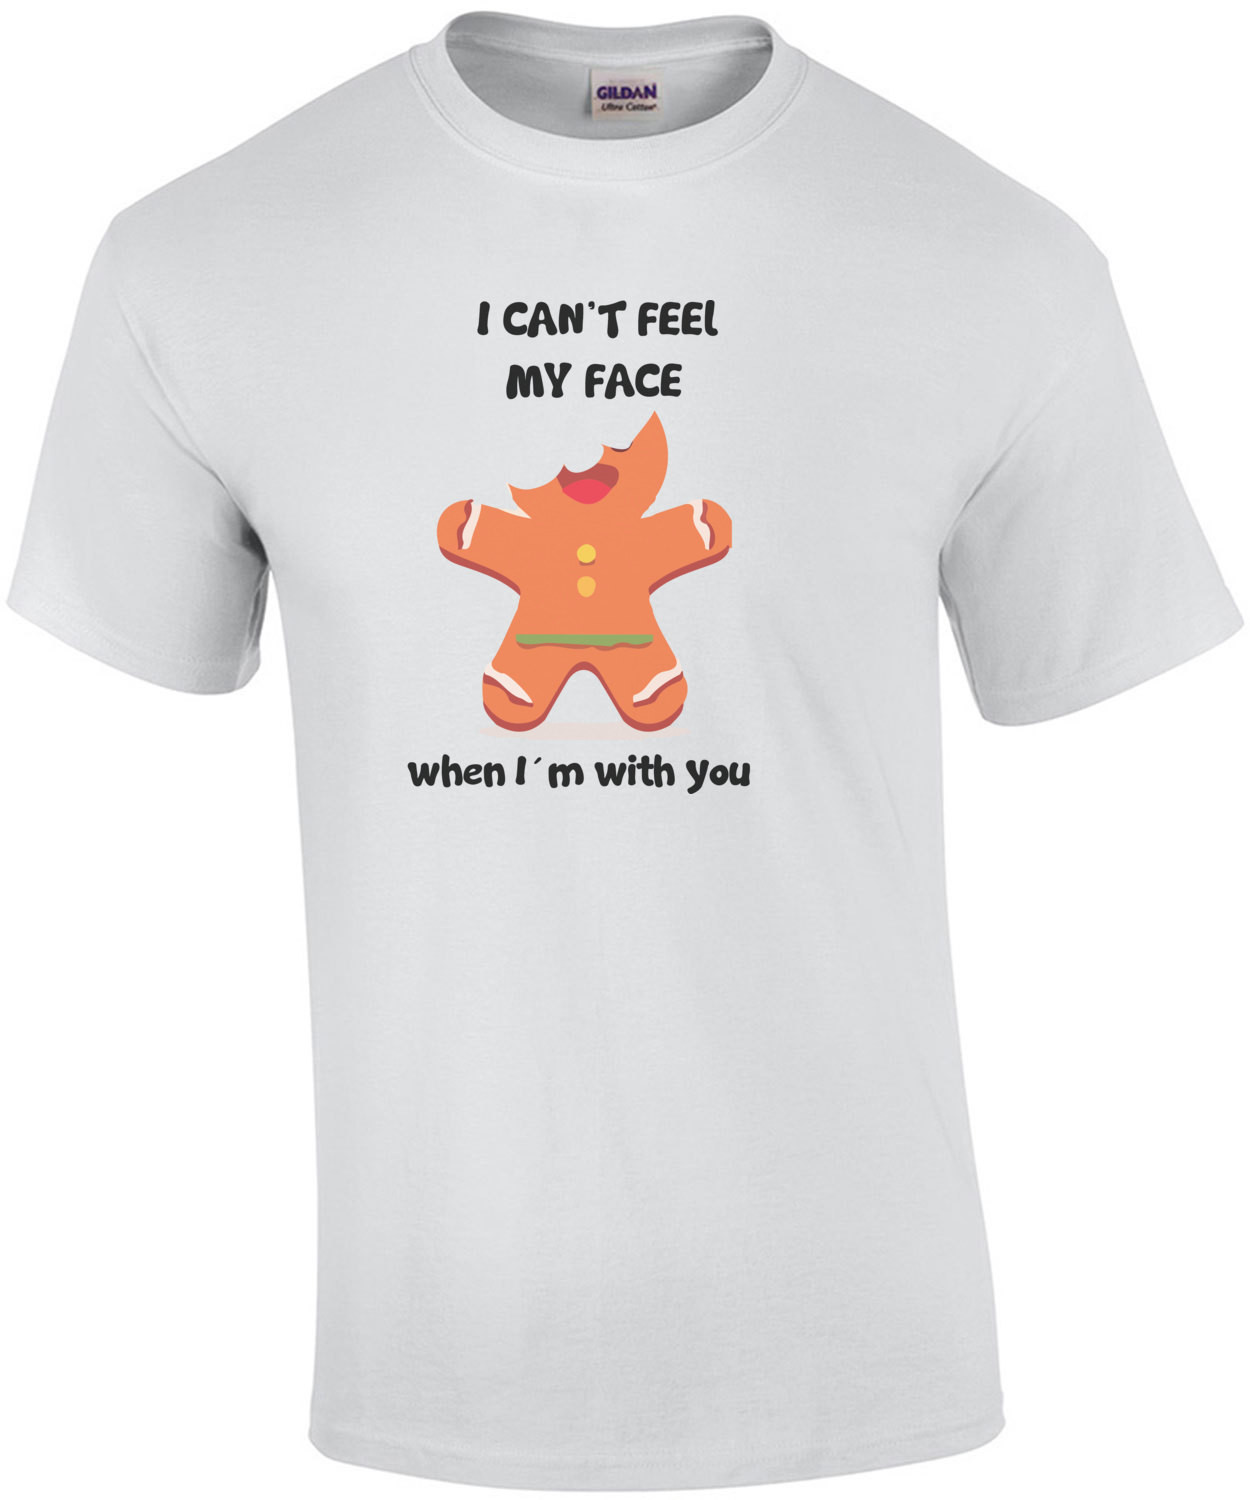 I can't feel my face when I'm with you. Gingerbread Cookie Christmas T-Shirt